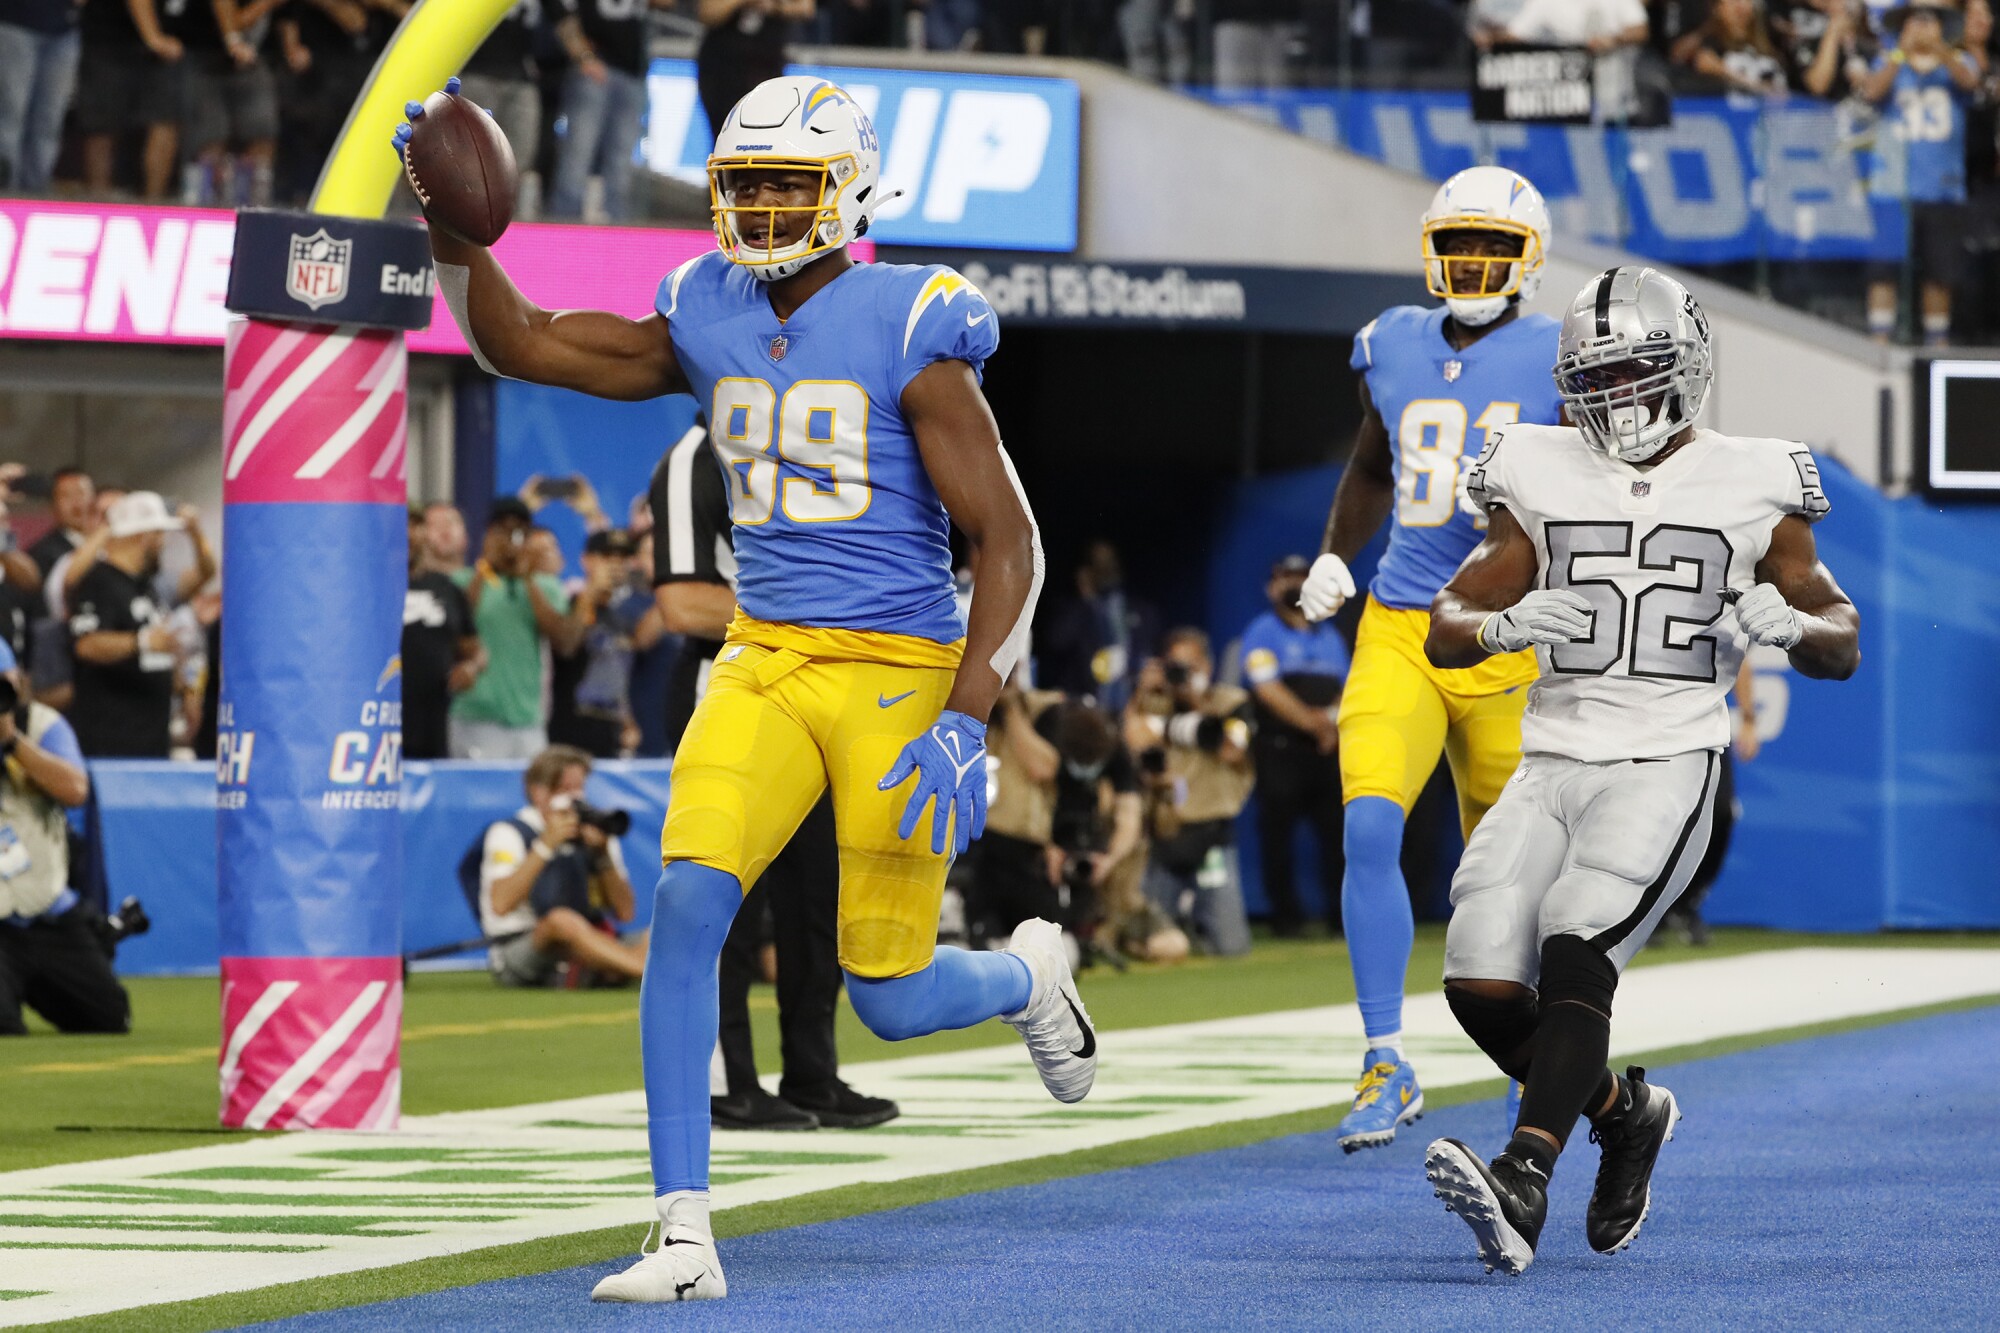  Chargers tight end Donald Parham celebrates after scoring against the Raiders in October.